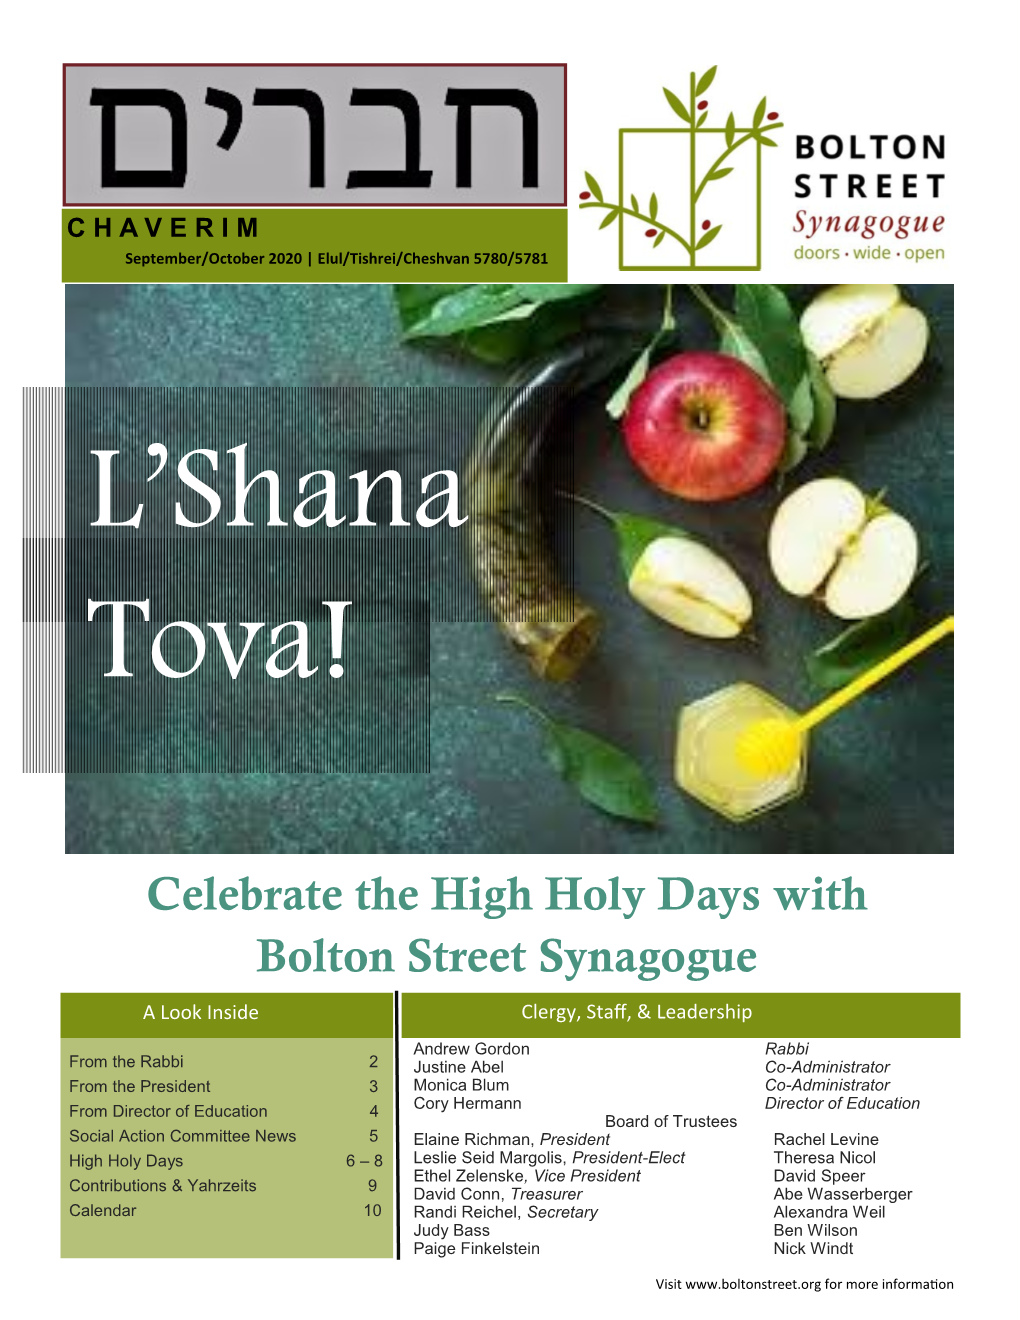 Celebrate the High Holy Days with Bolton Street Synagogue